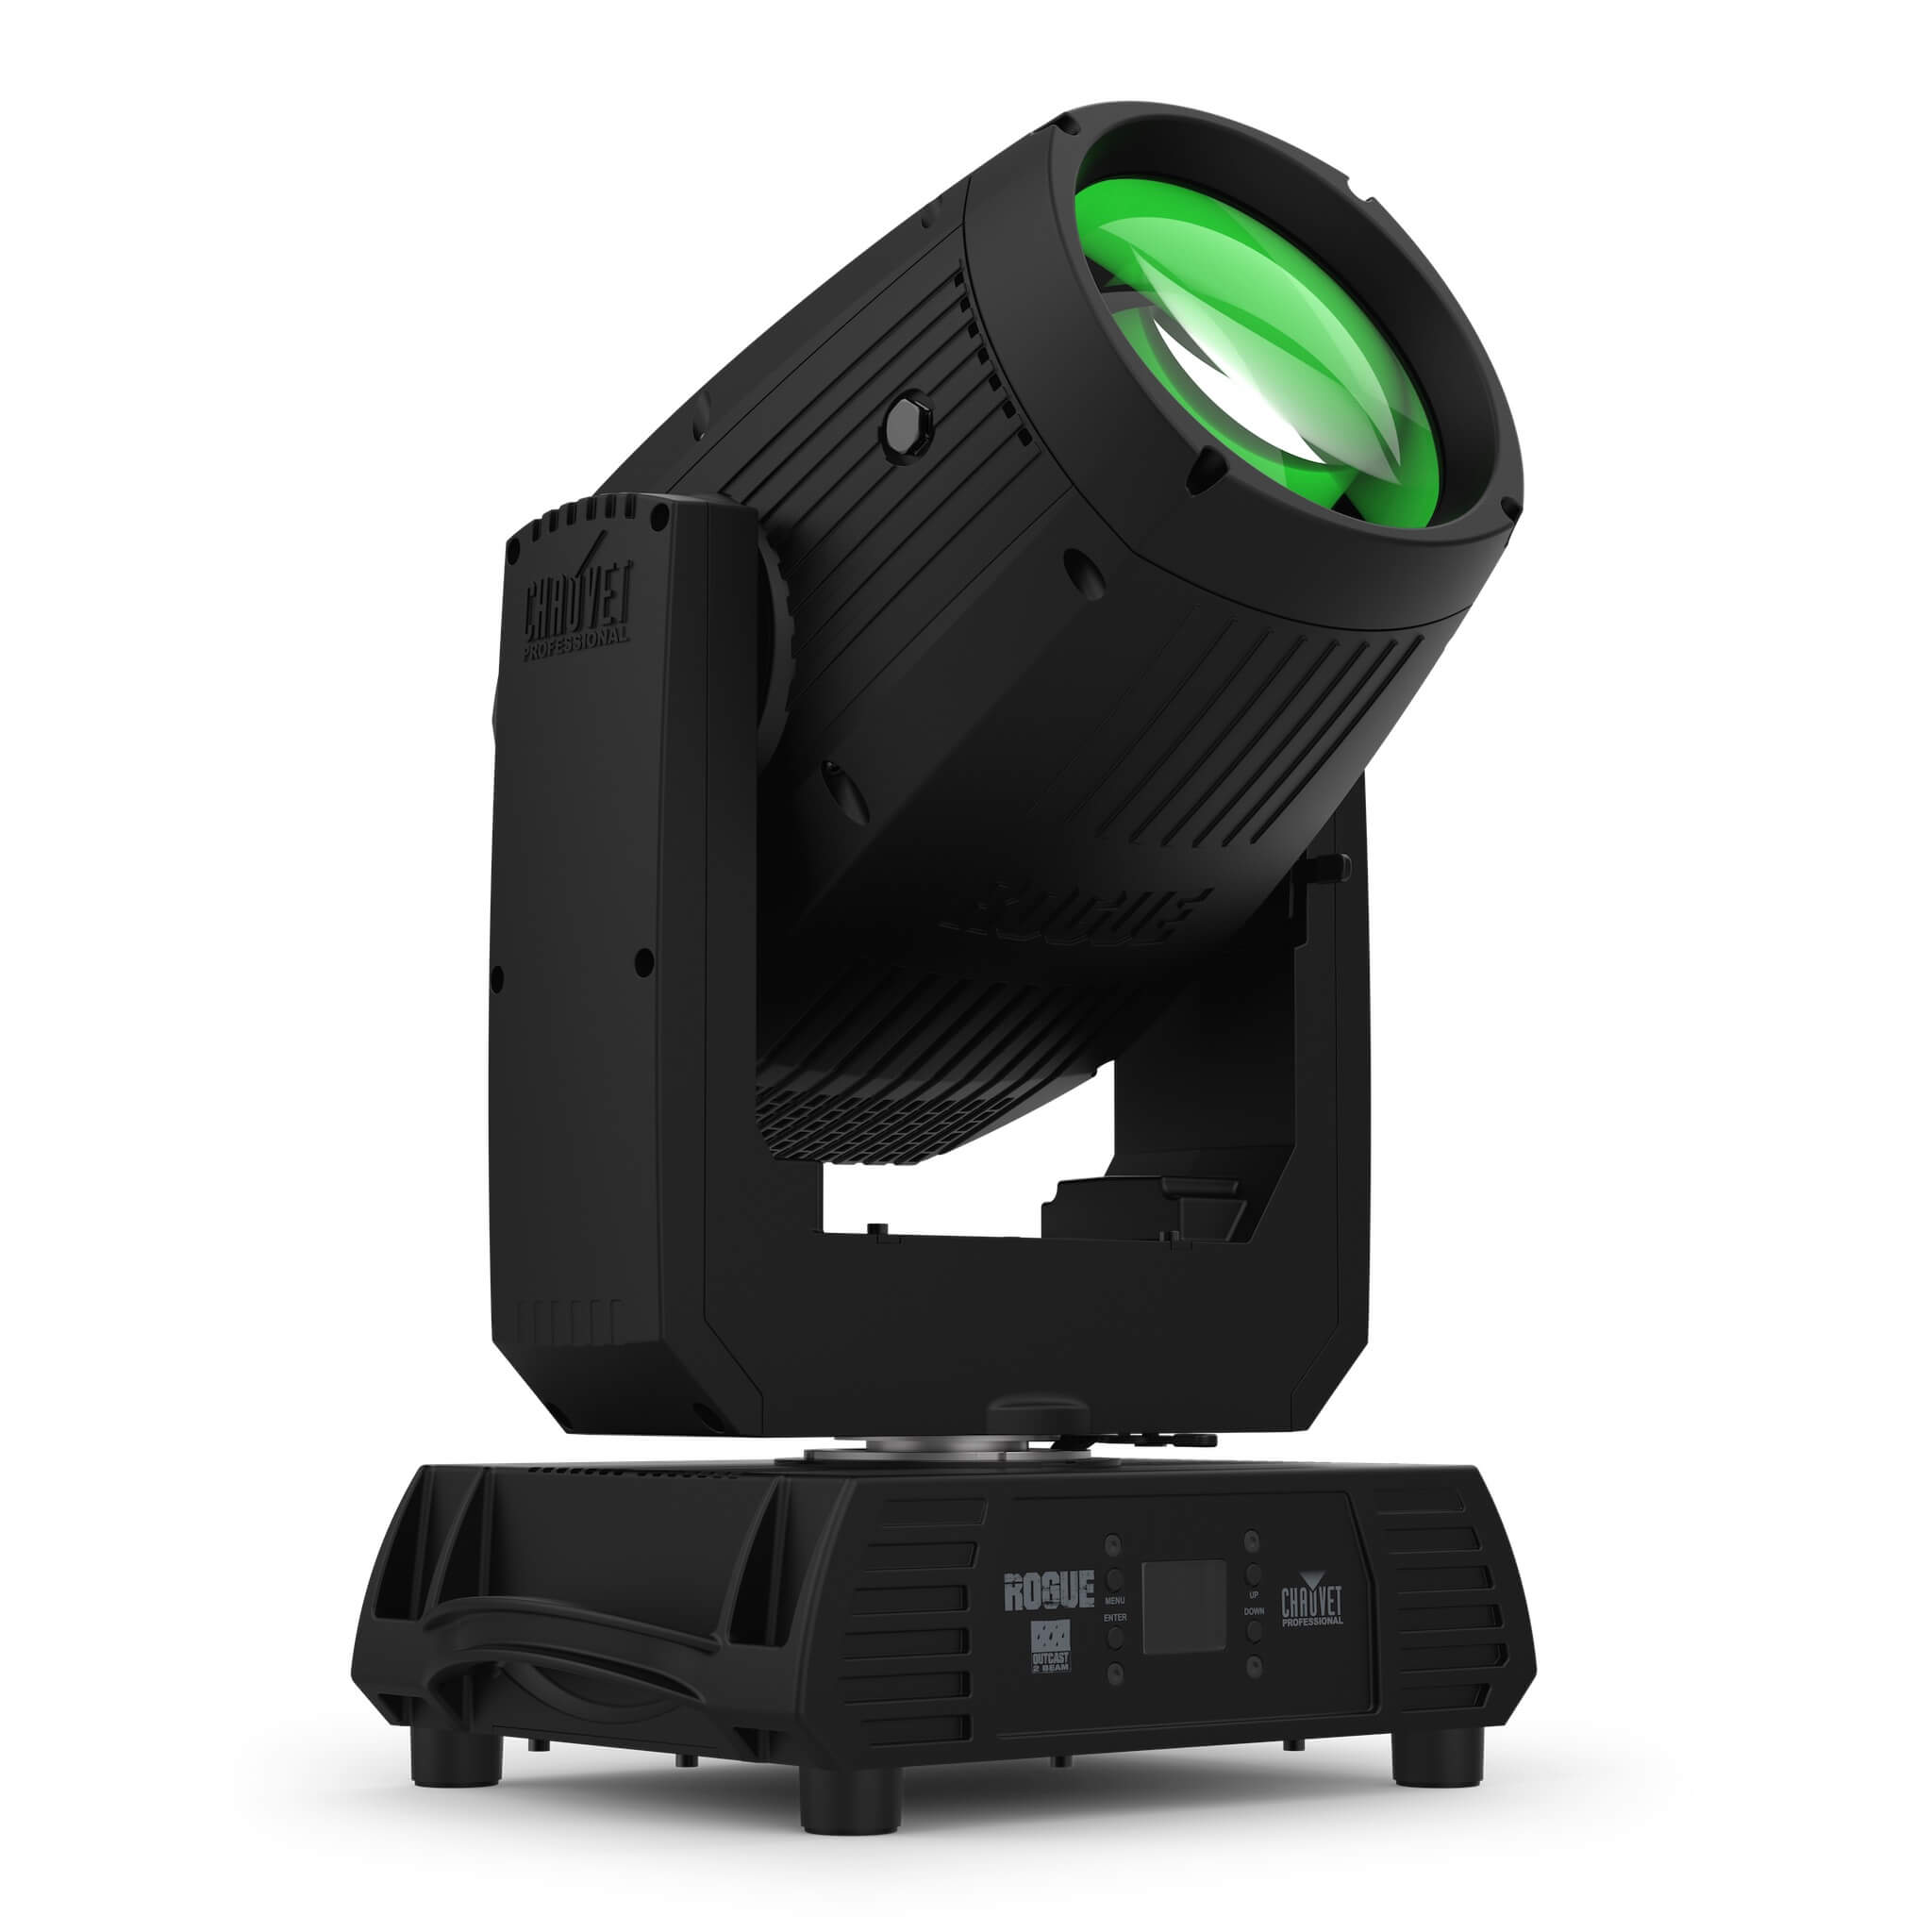 Chauvet Professional Rogue Outcast 2 Beam - LED Moving Head Light, right